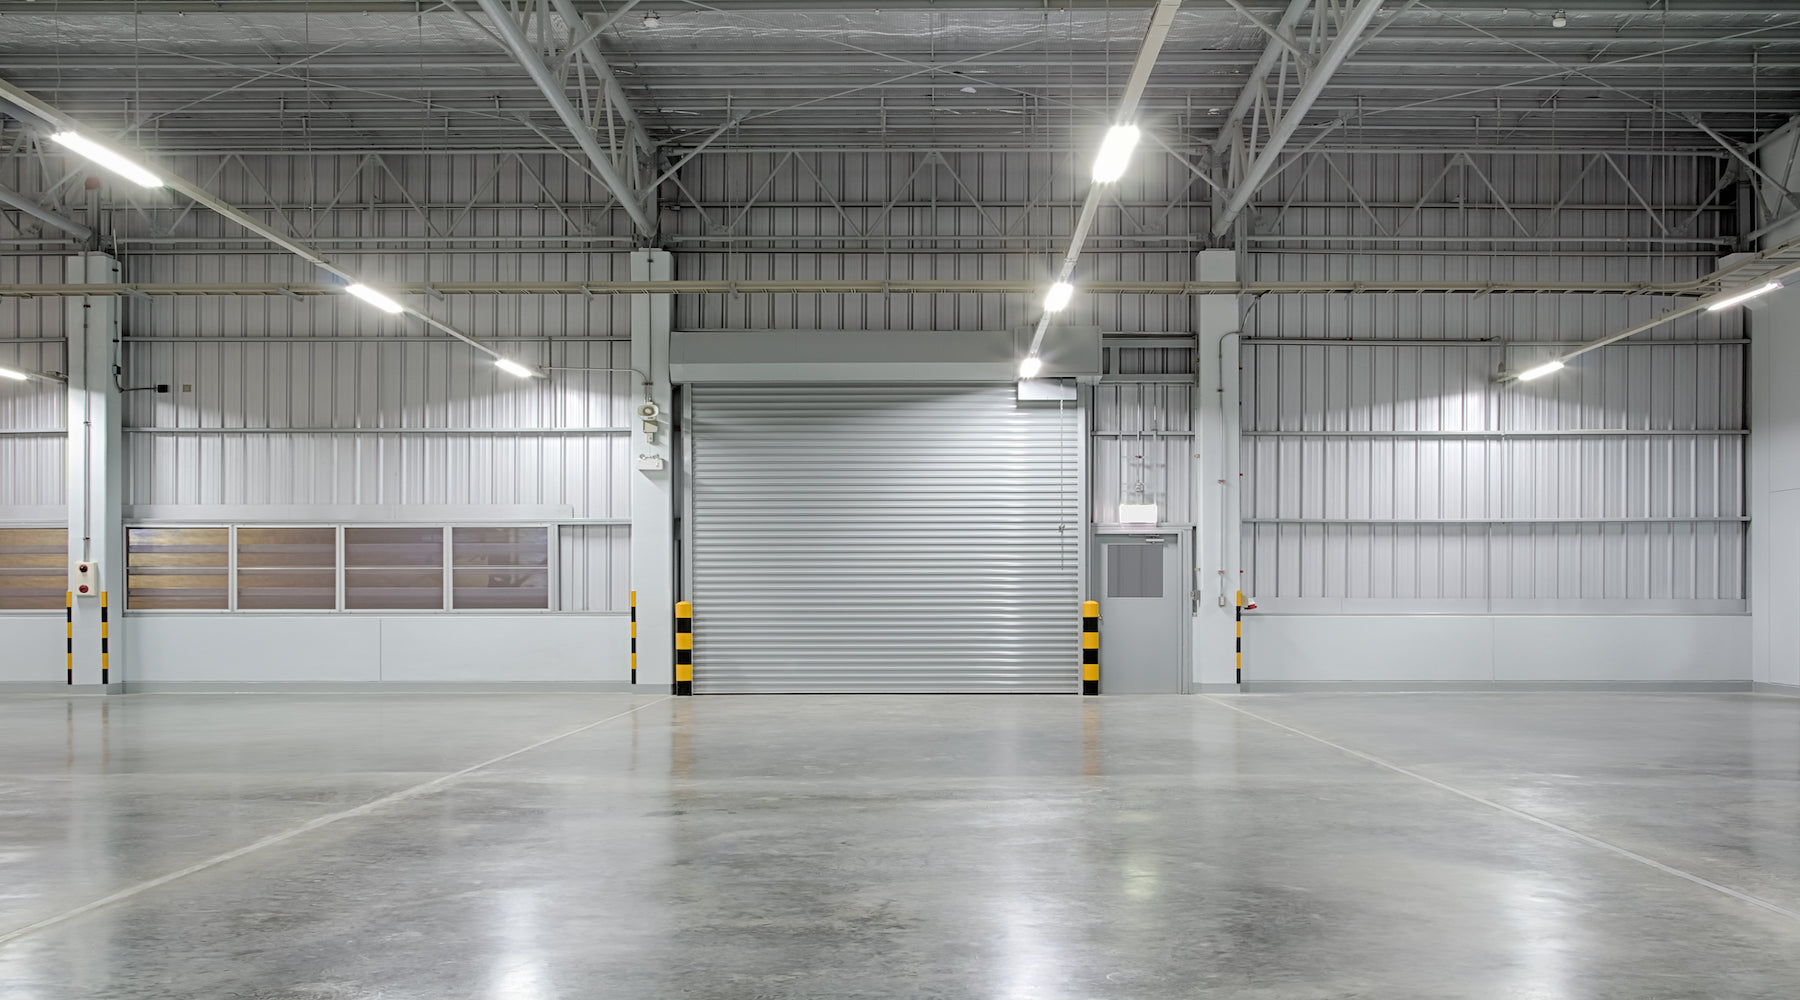 Strip light fixtures installed in a large warehouse